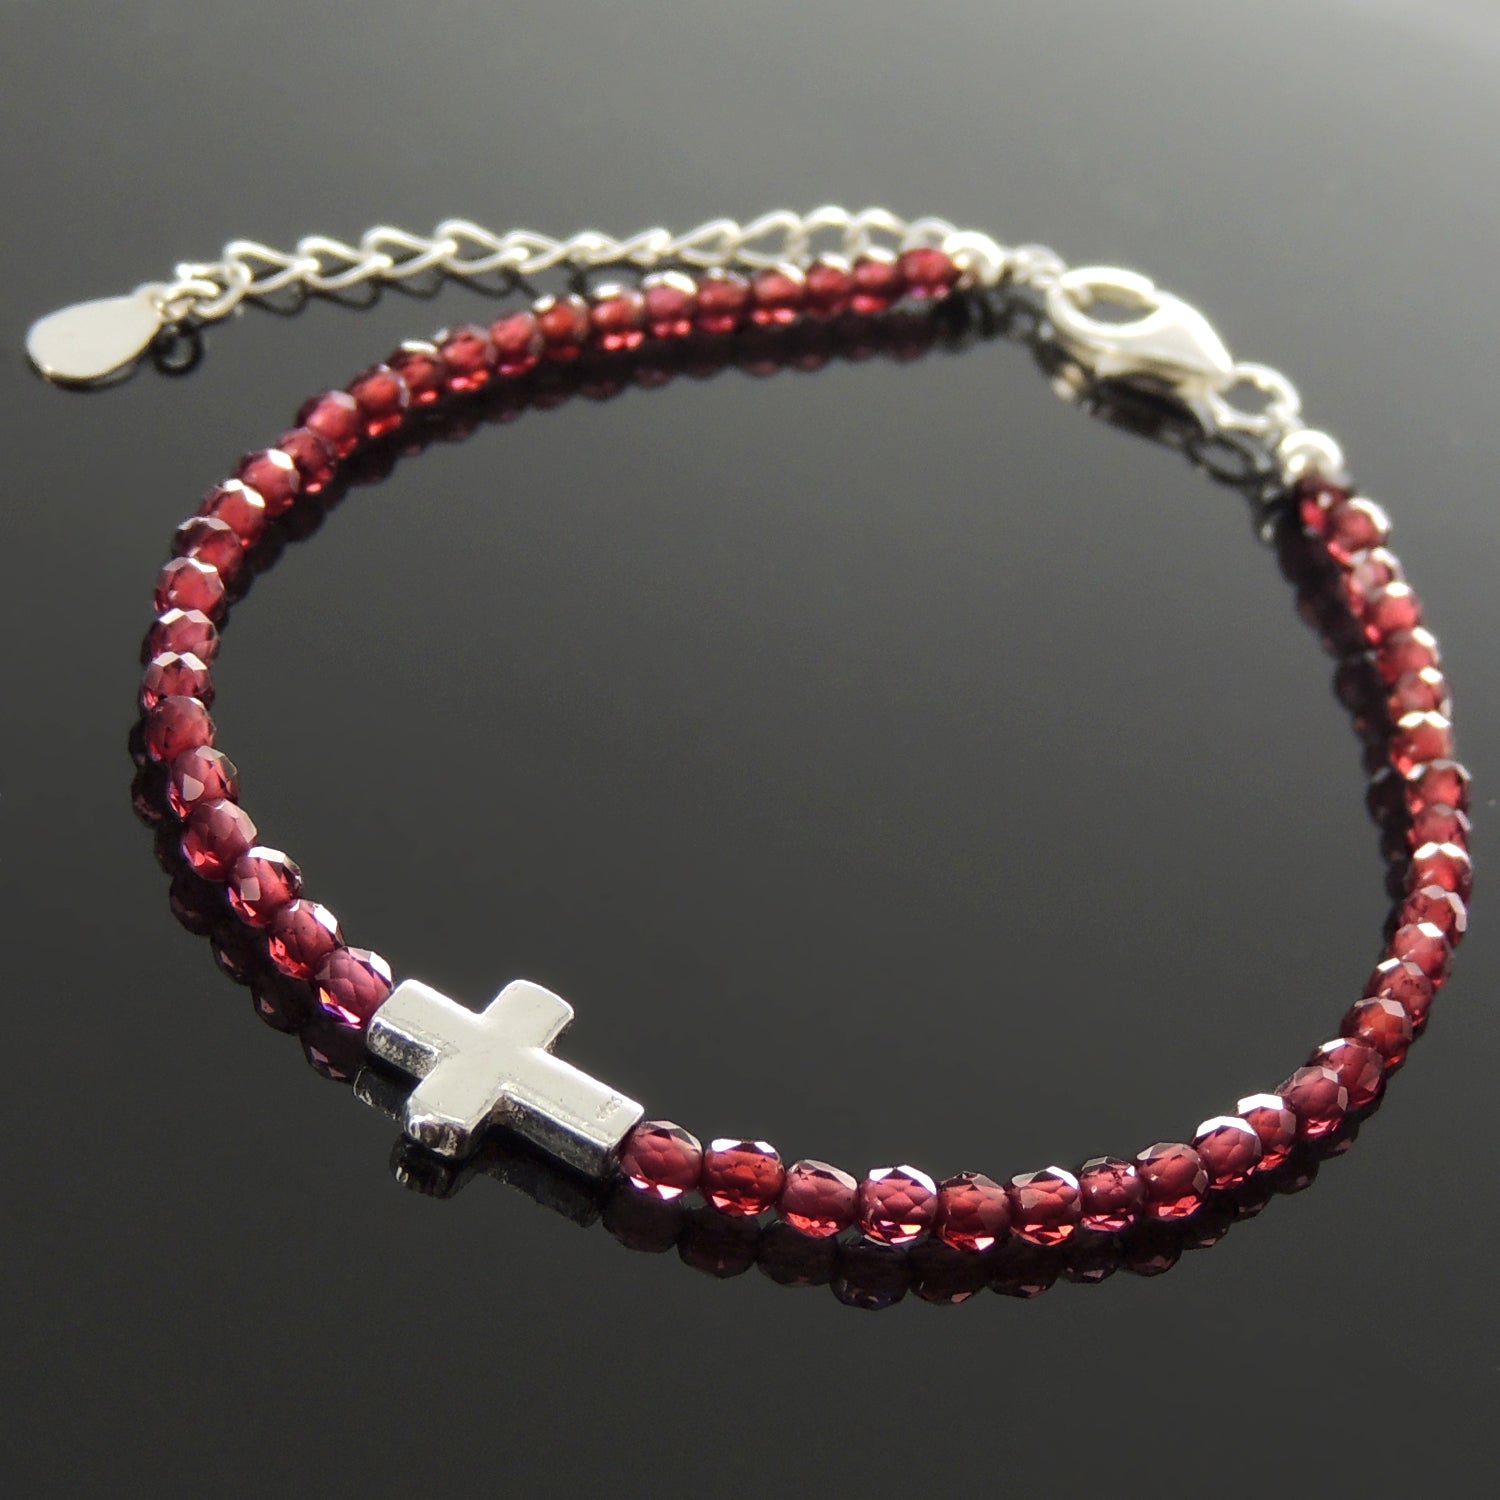 Handmade Adjustable Clasp Bracelet - Men's Women's Cross Jewelry, Courage with 3mm Faceted Red Garnet Healing Gemstones, Genuine S925 Sterling Silver Beads, Chain (Non-Plated) BR1810